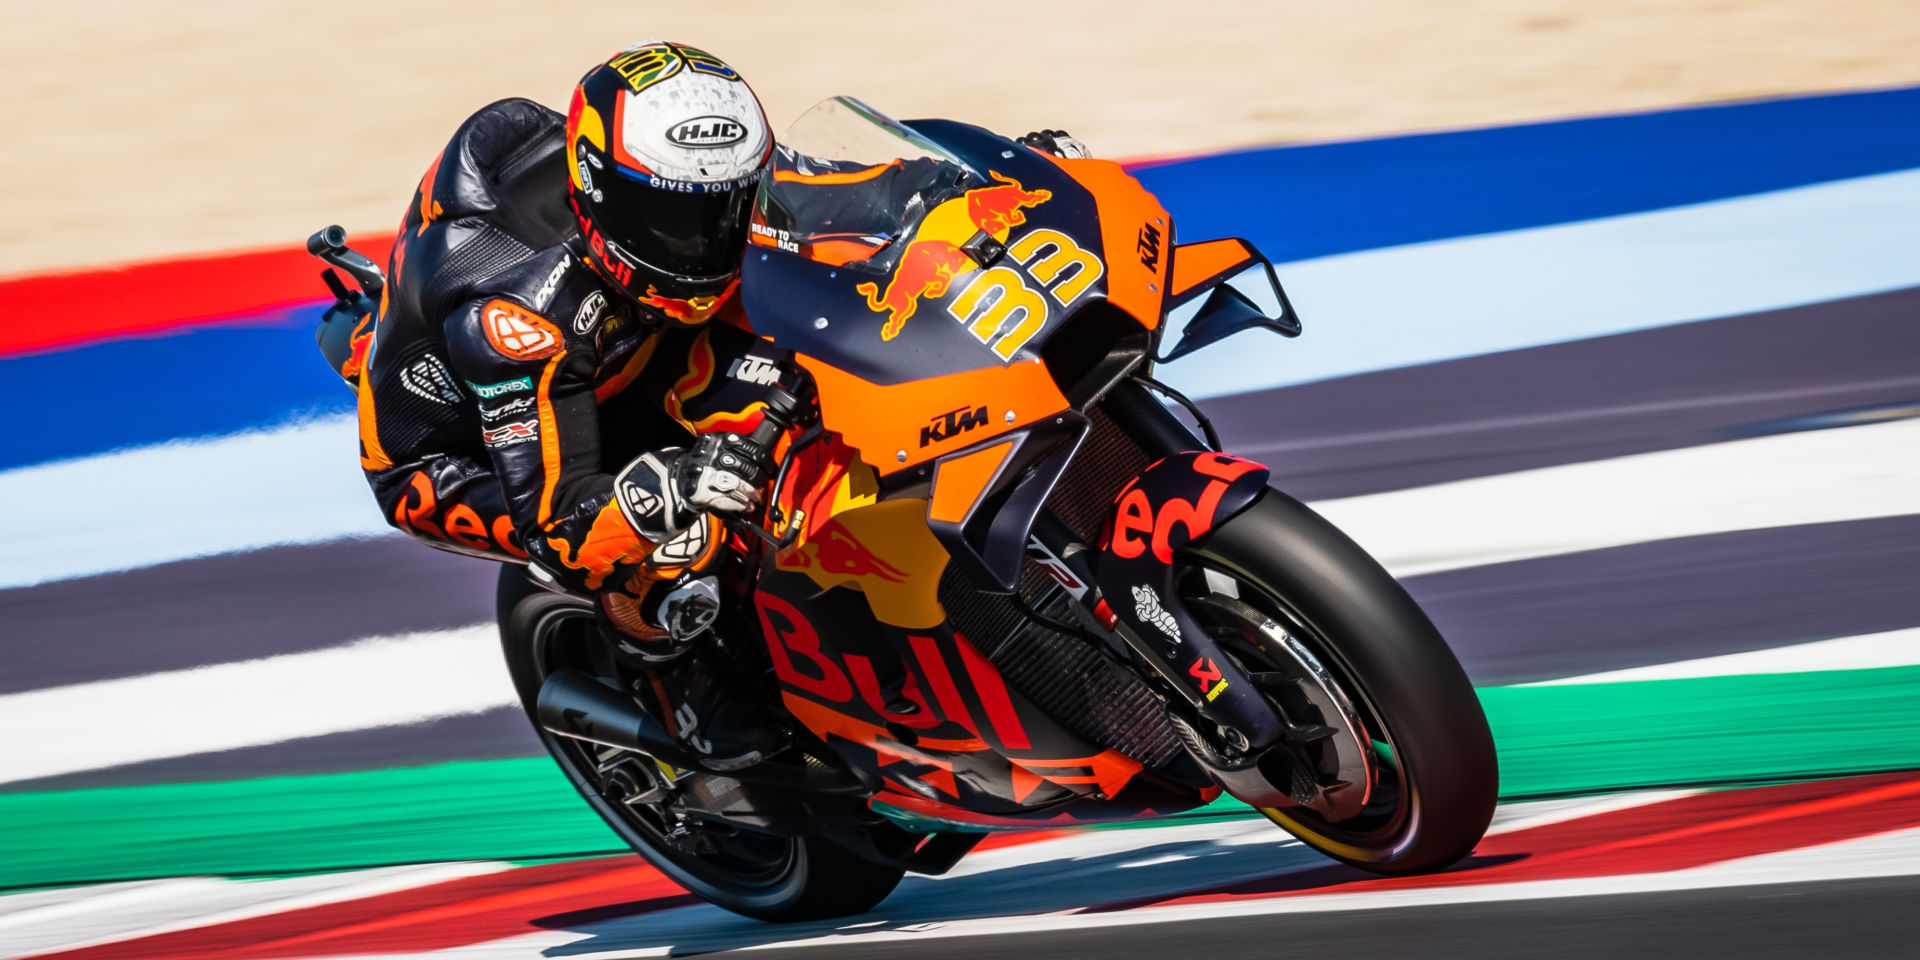 Brad Binder (33) at speed on his Red Bull KTM RC16. Photo by Polarity Photo, courtesy KTM.